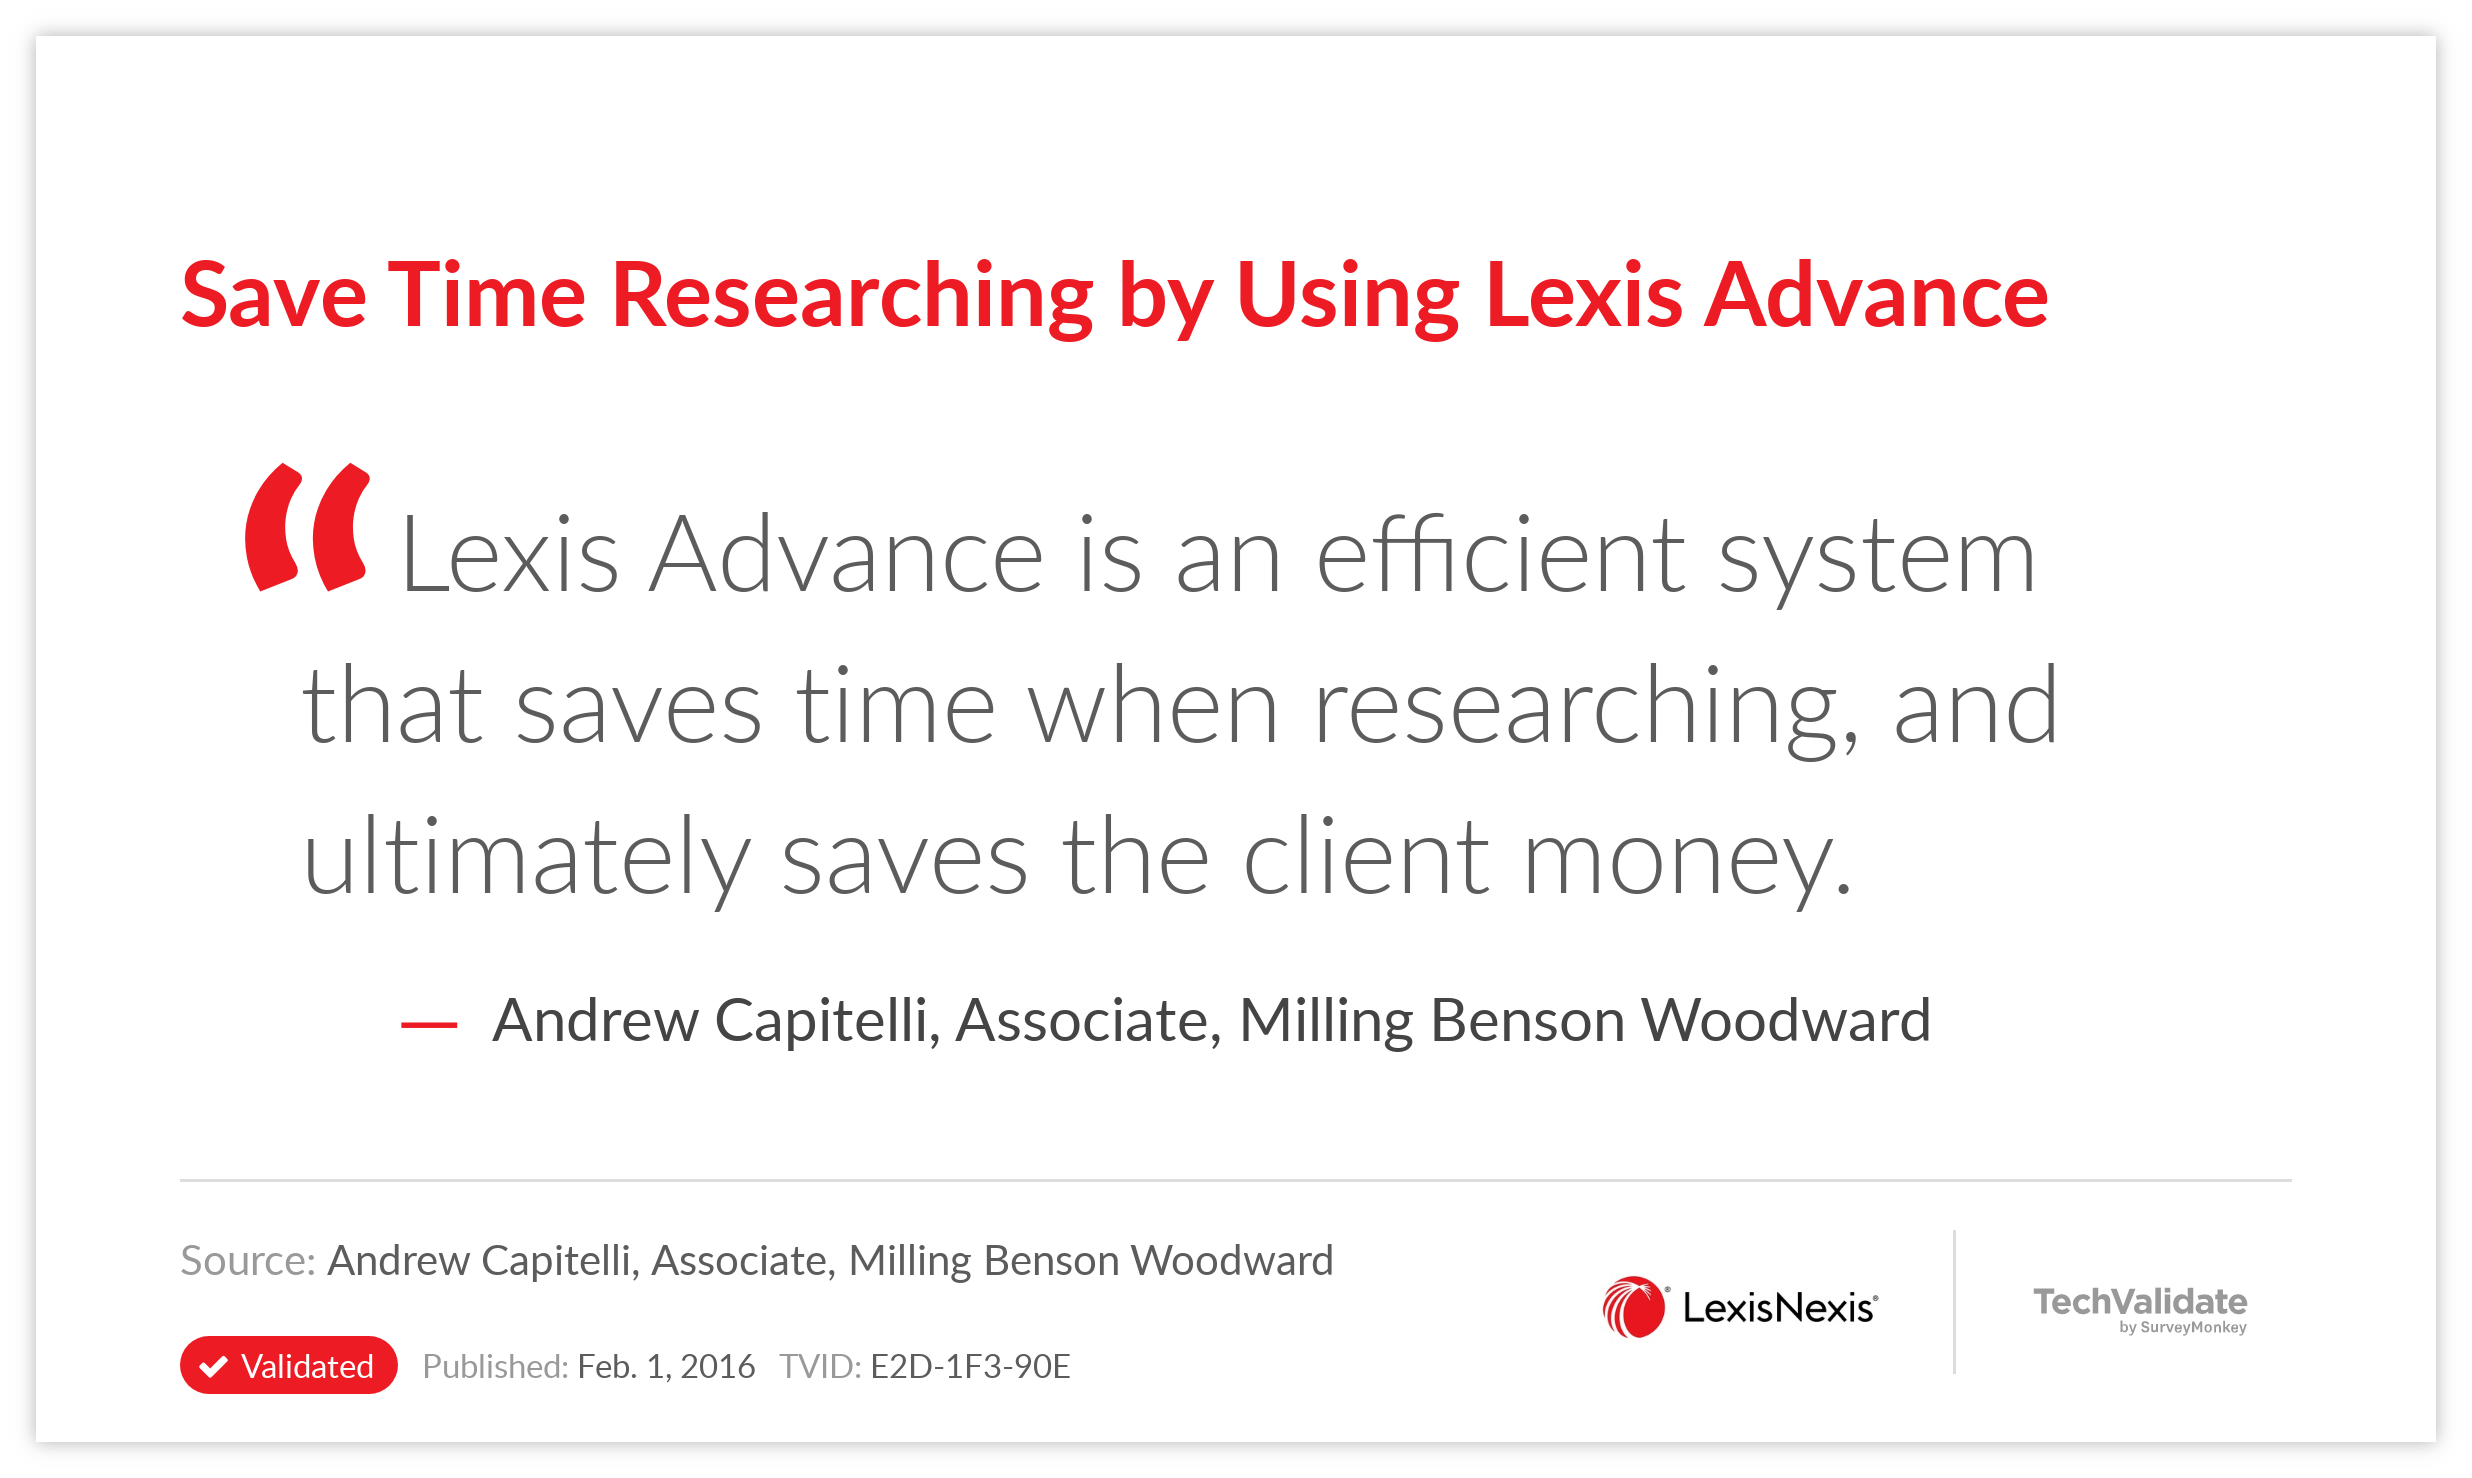 Save Time Researching by Using Lexis Advance